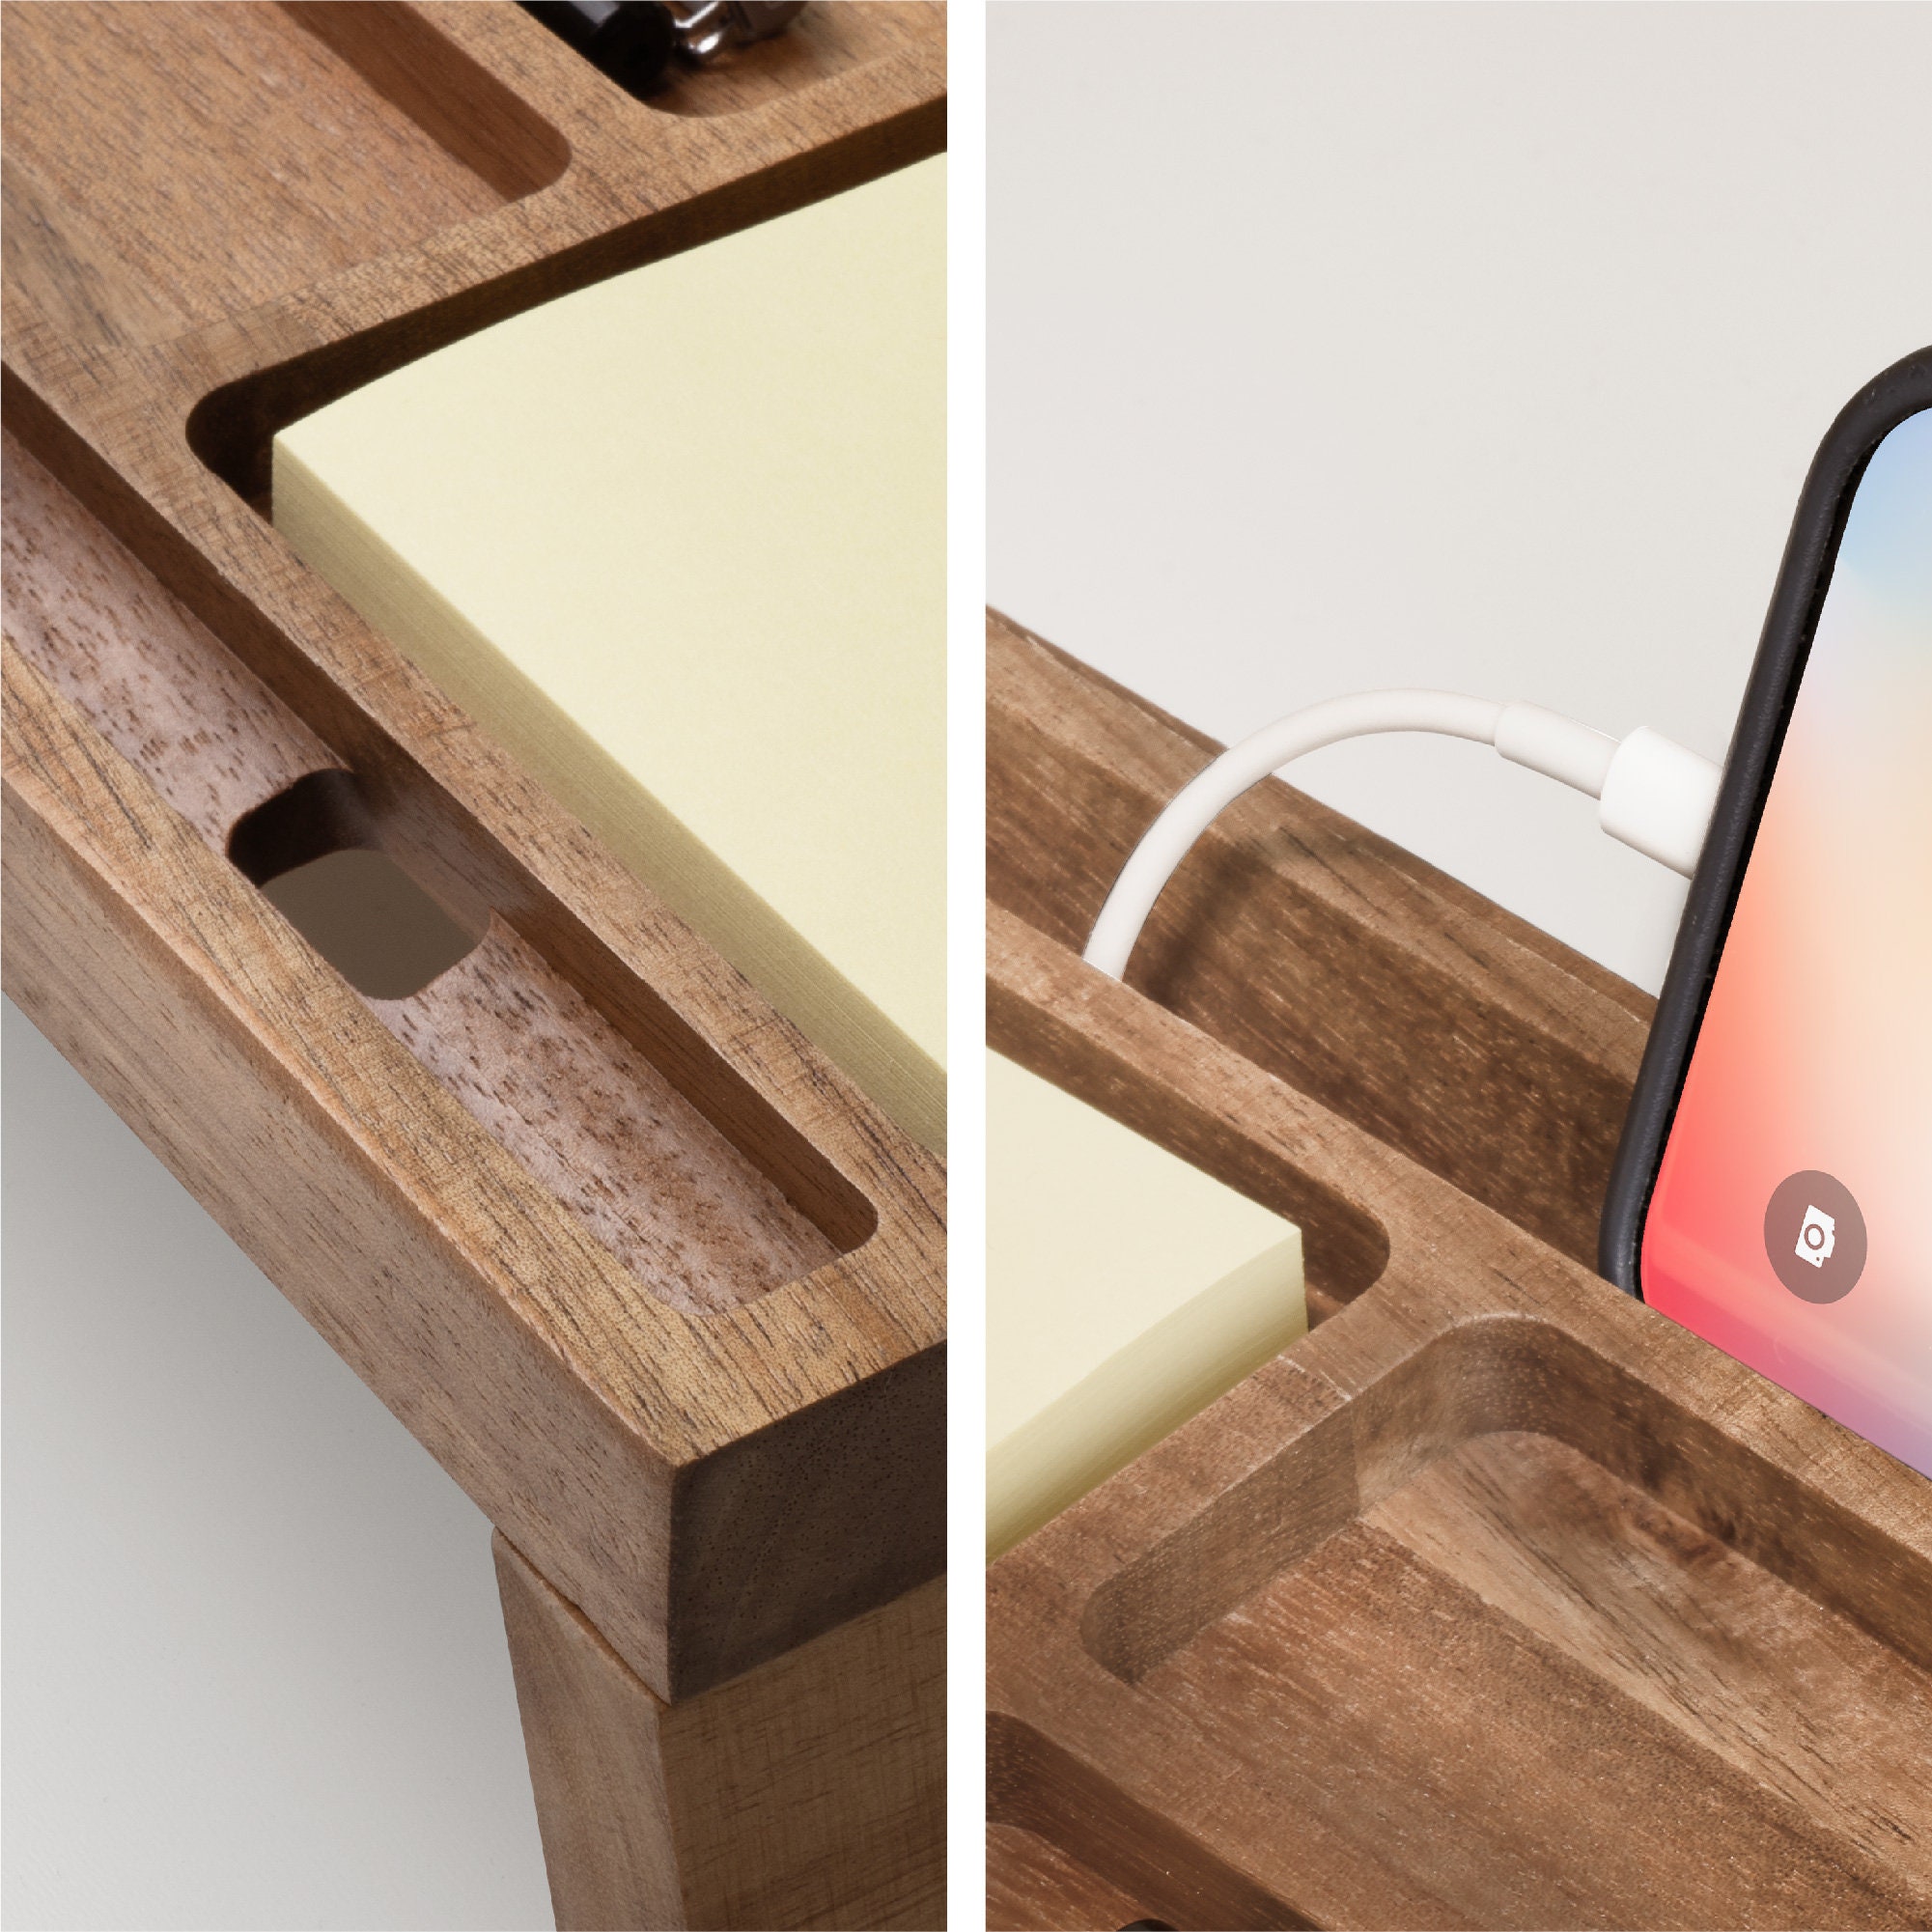 Wood Accessory Desk Organizer For Electronics